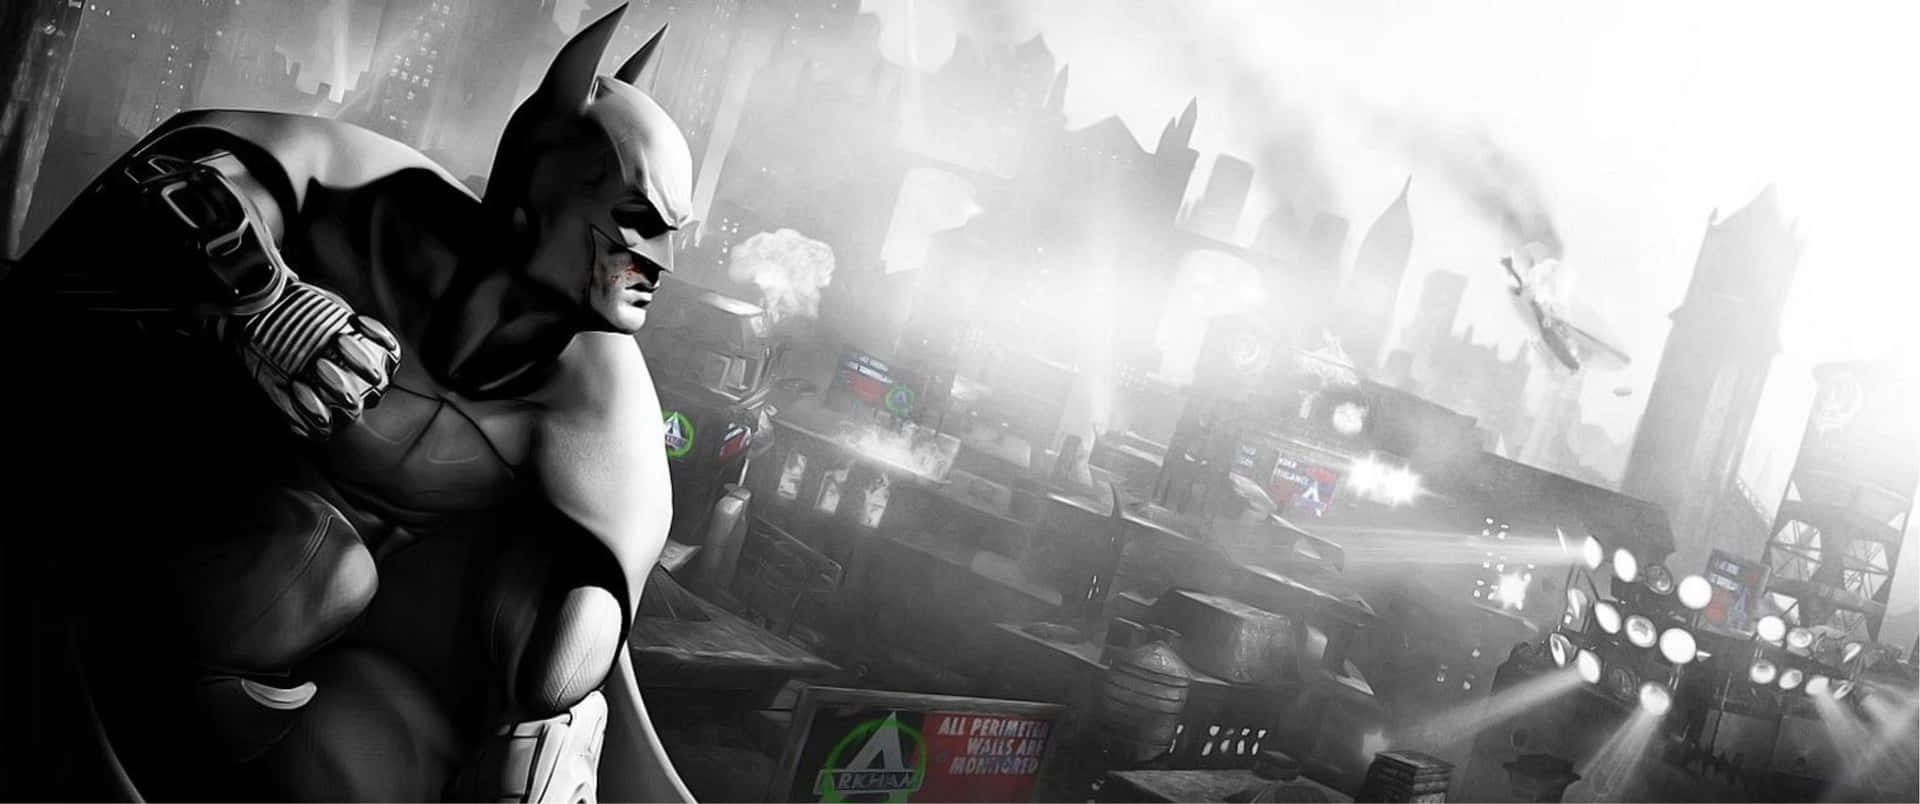 Batman fights for justice in Arkham City